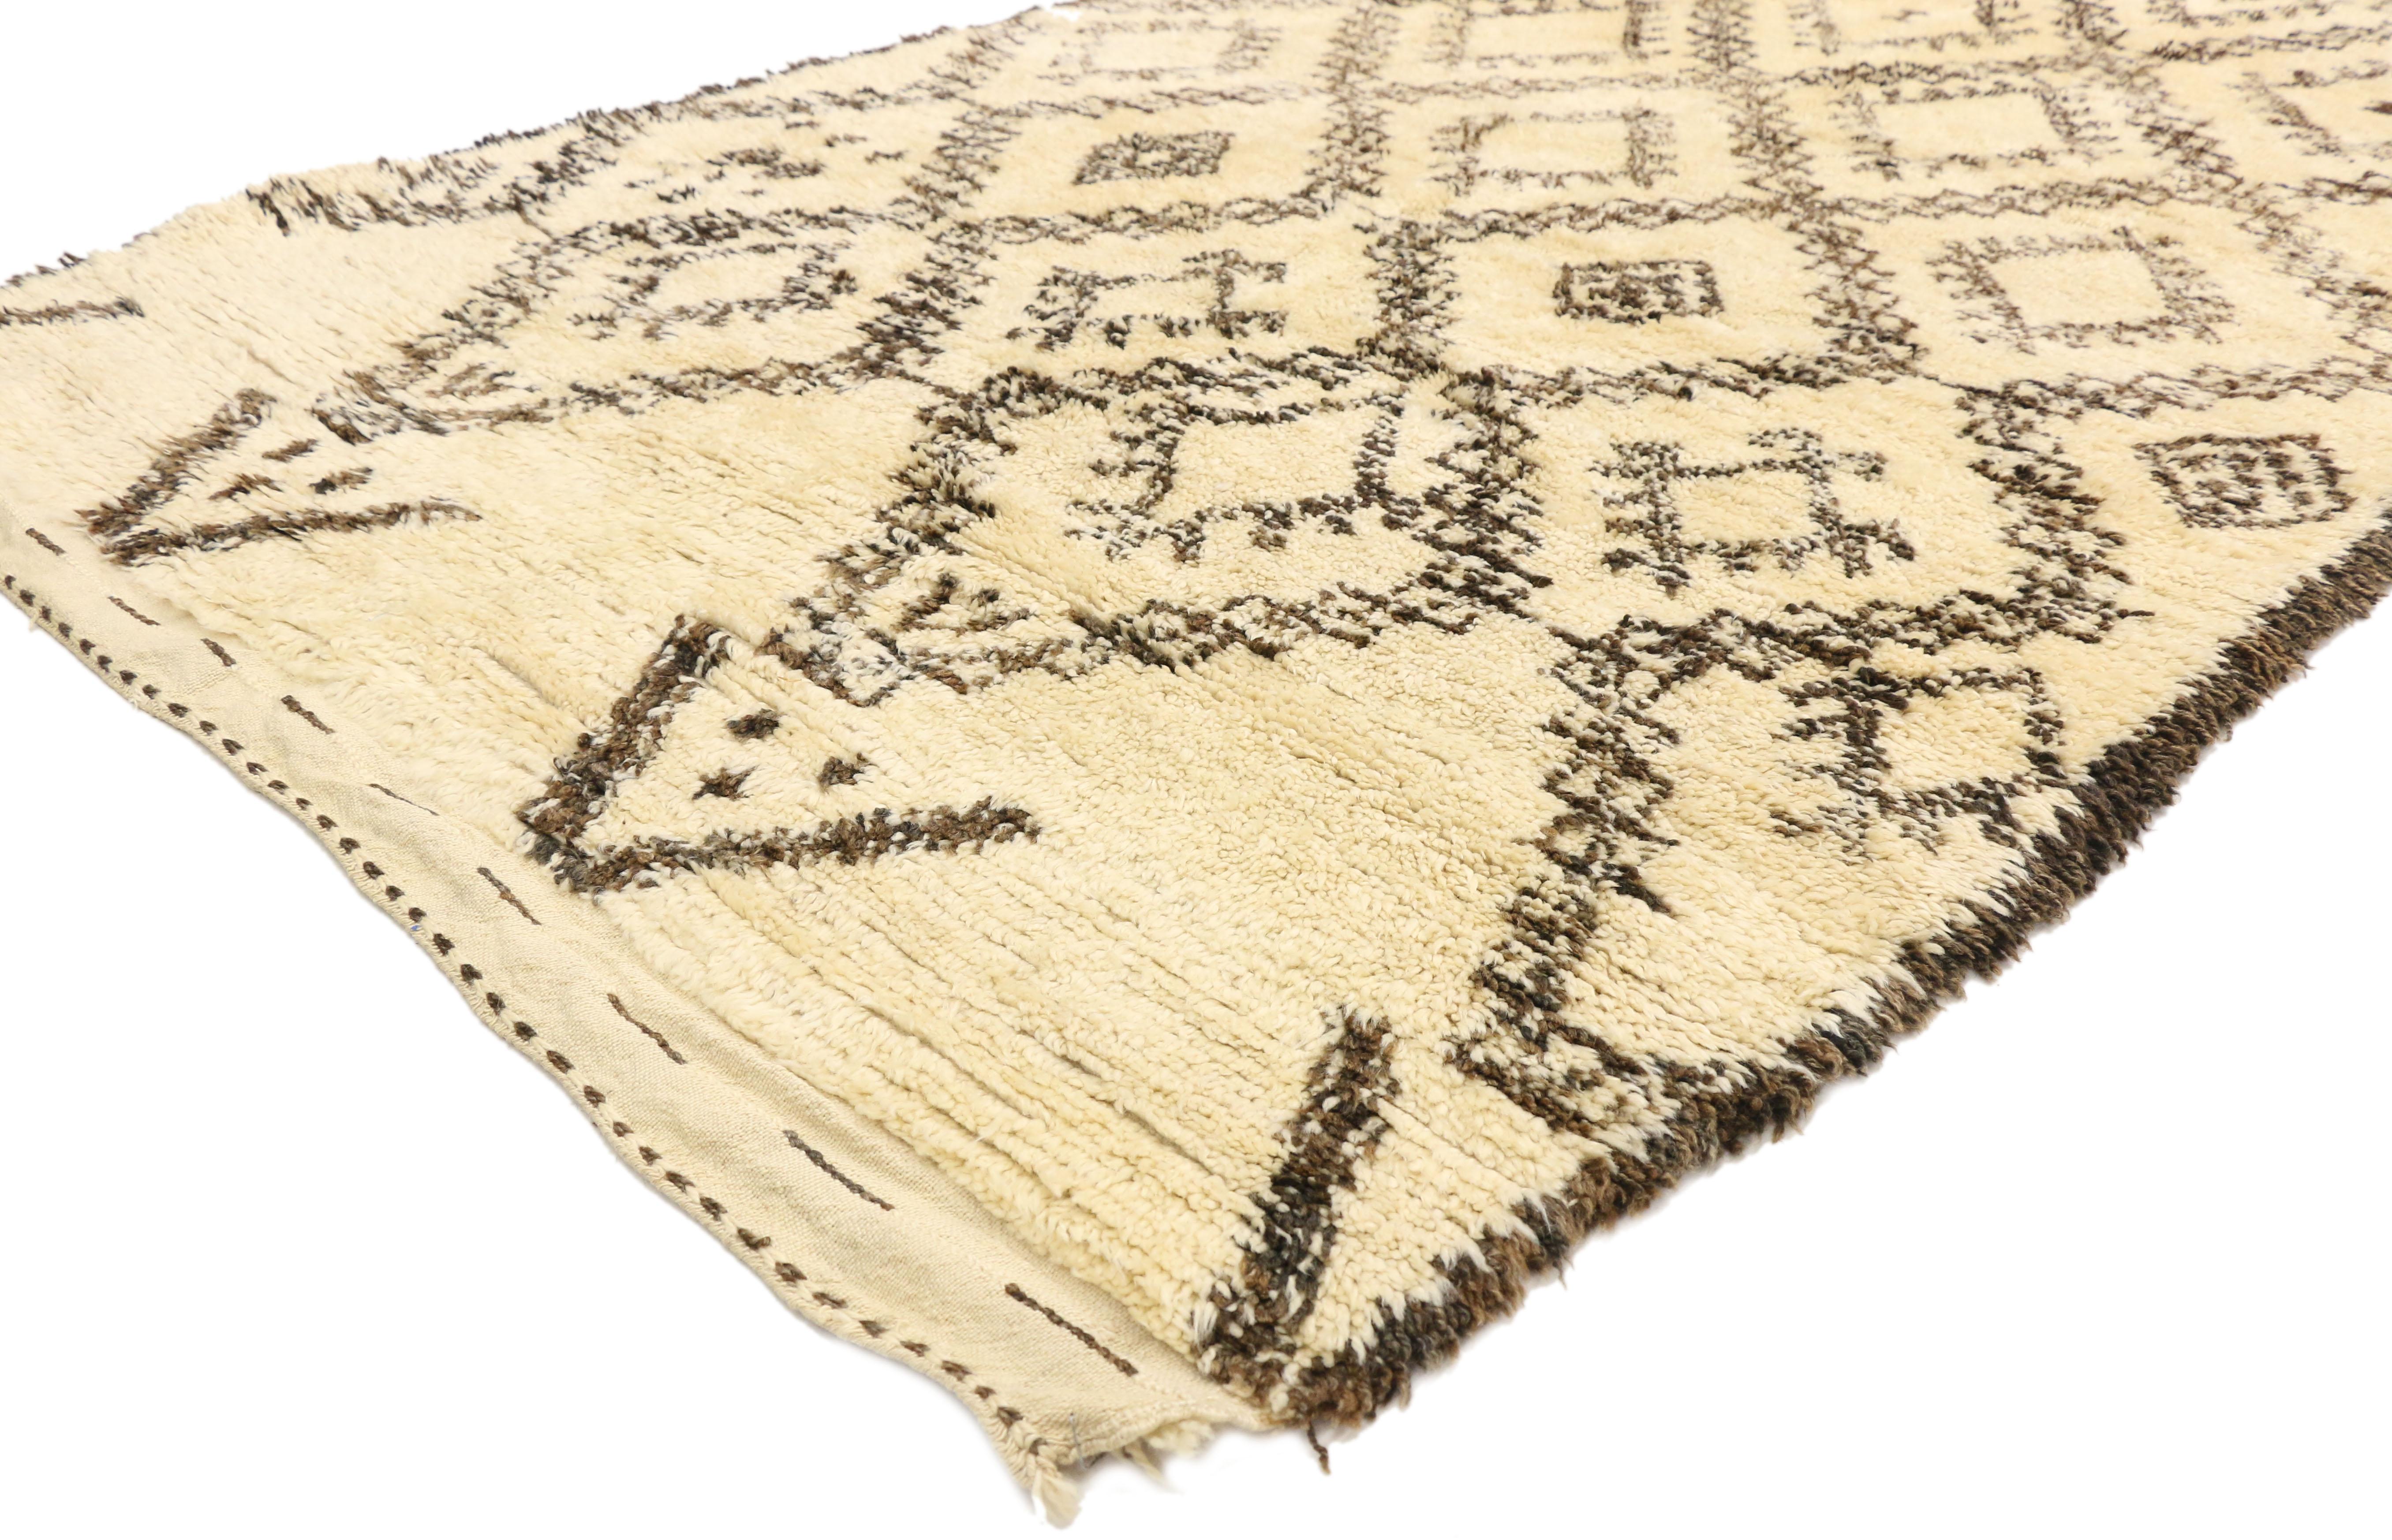 20773 Nomadic Modern Beni Ourain Moroccan Rug with Mid-Century Modern Tribal Style, Beni Ouarain Rug 05'08 x 09'08. This hand-knotted wool Beni Ourain Moroccan rug features a lozenge trellis pattern on a neutral background. Bold, thick lines